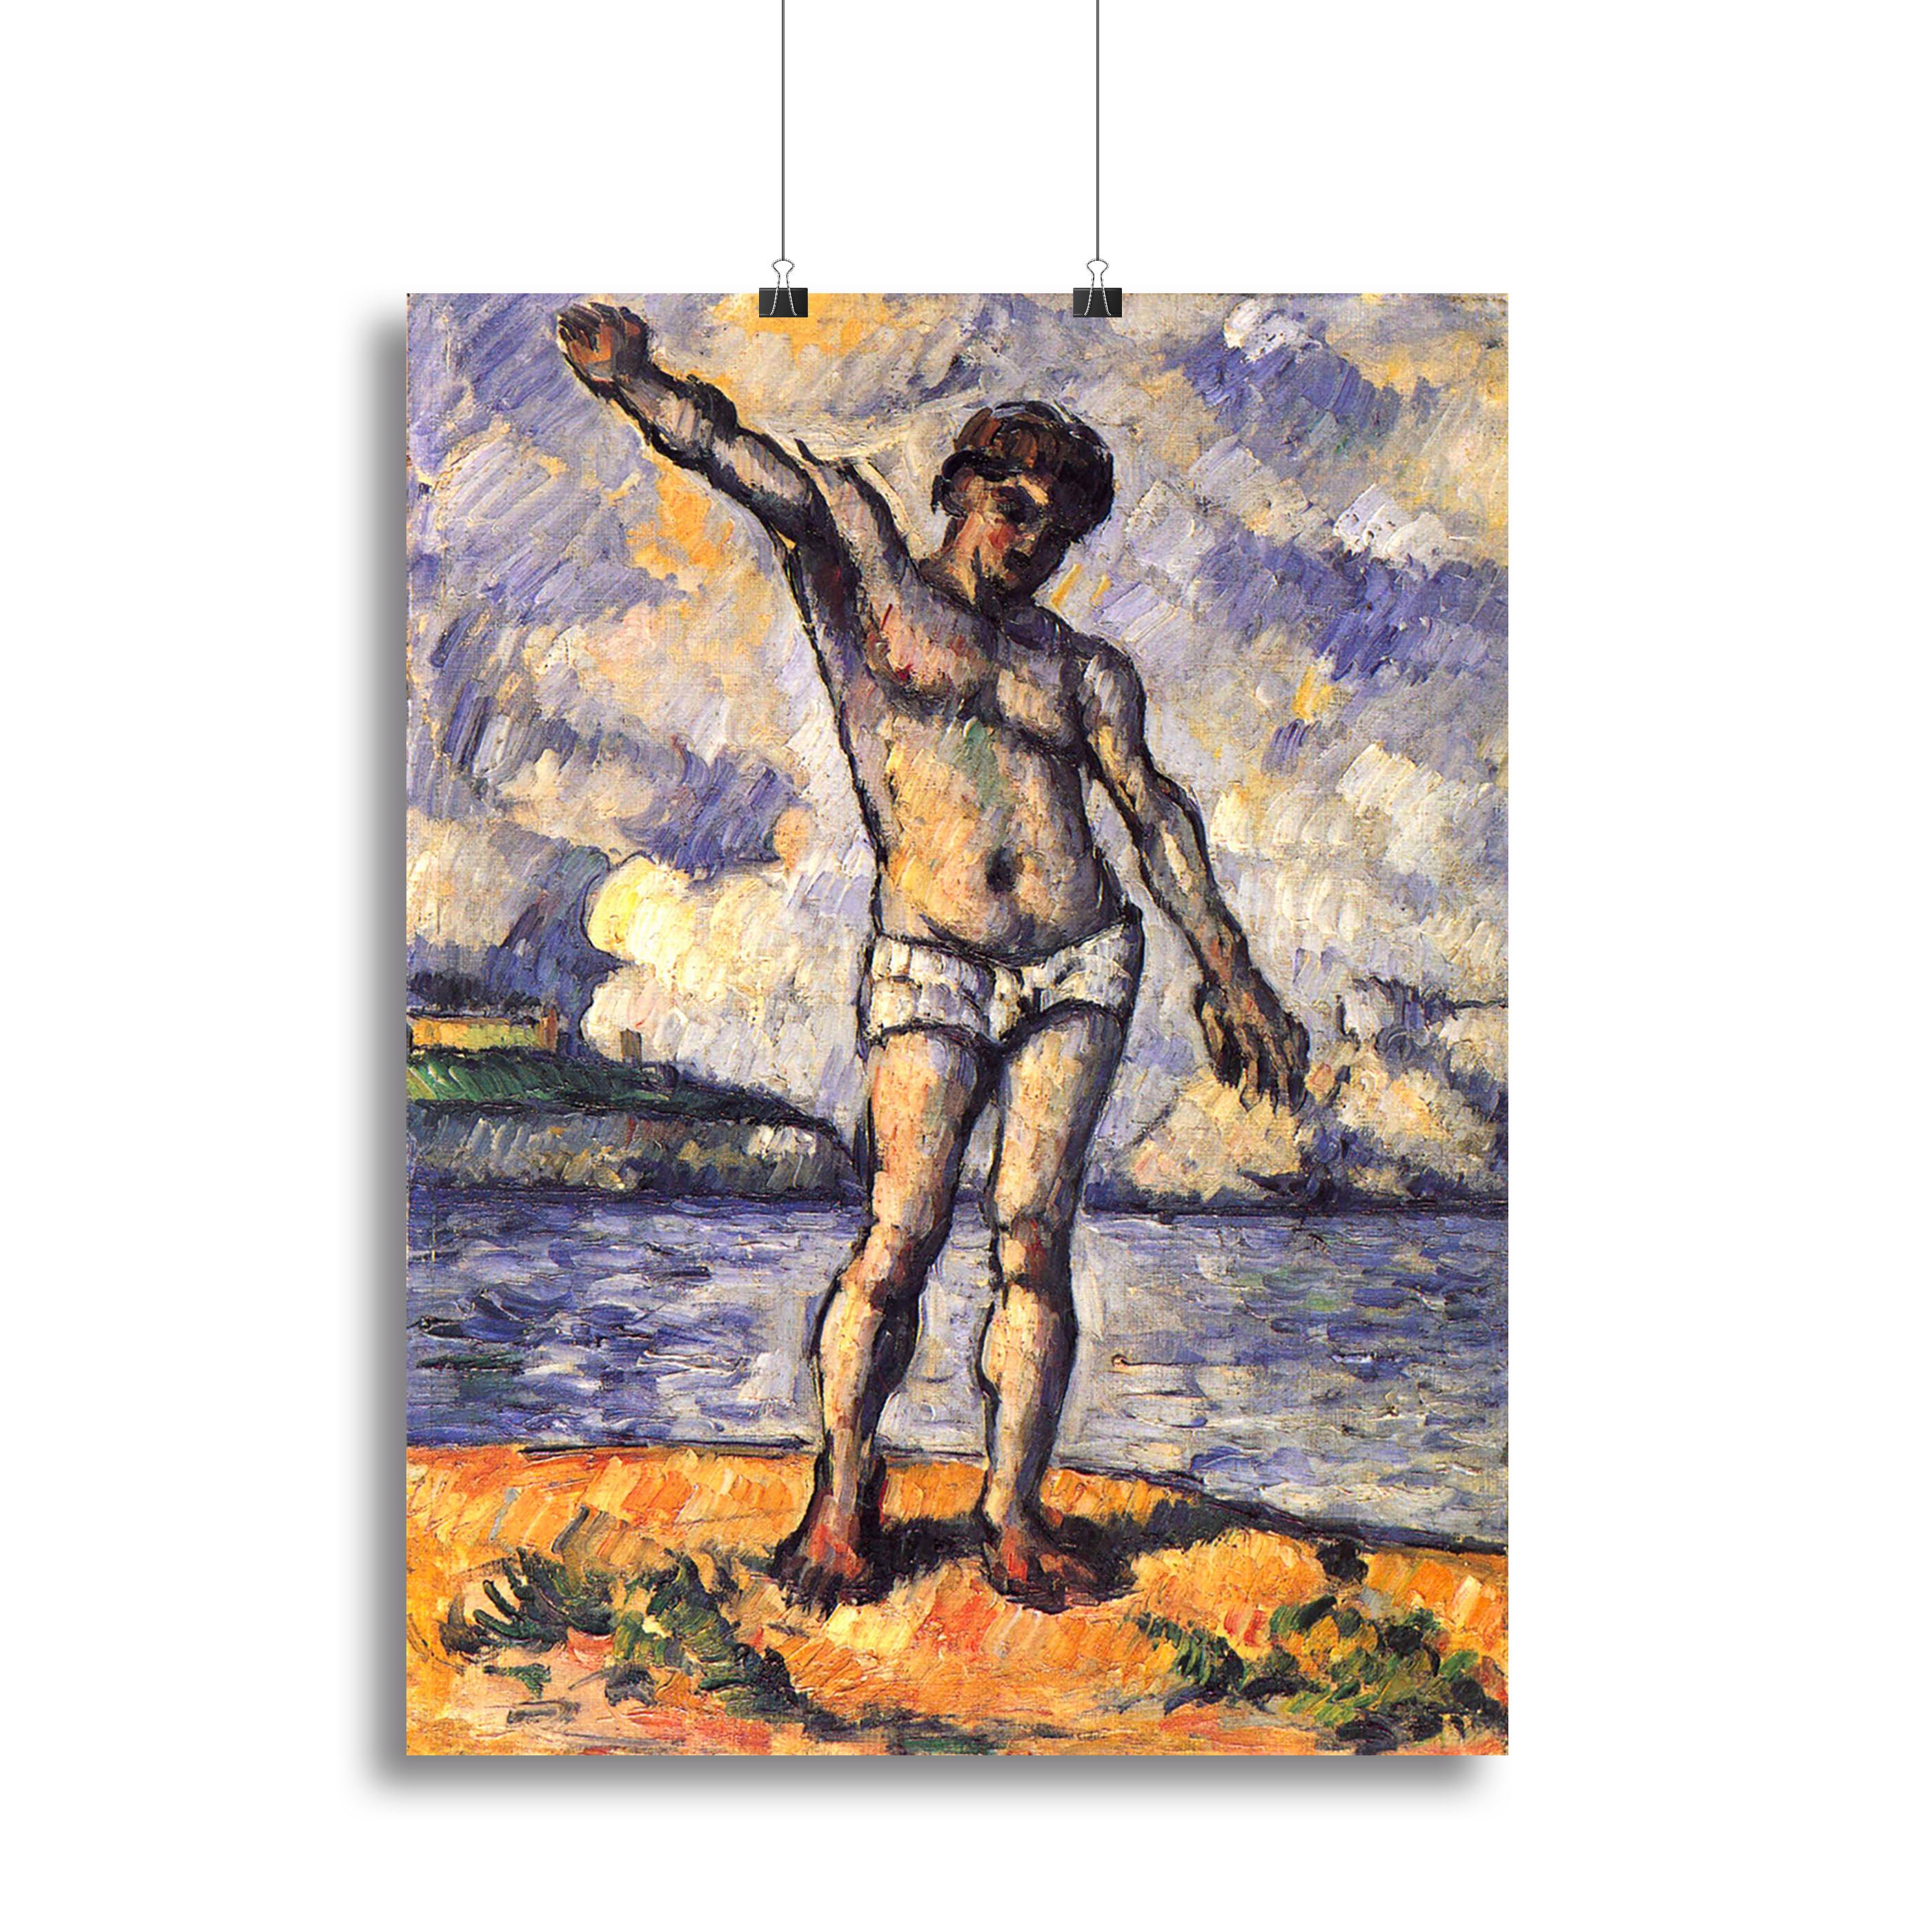 Swimmer with outstretched arms by Cezanne Canvas Print or Poster - Canvas Art Rocks - 2